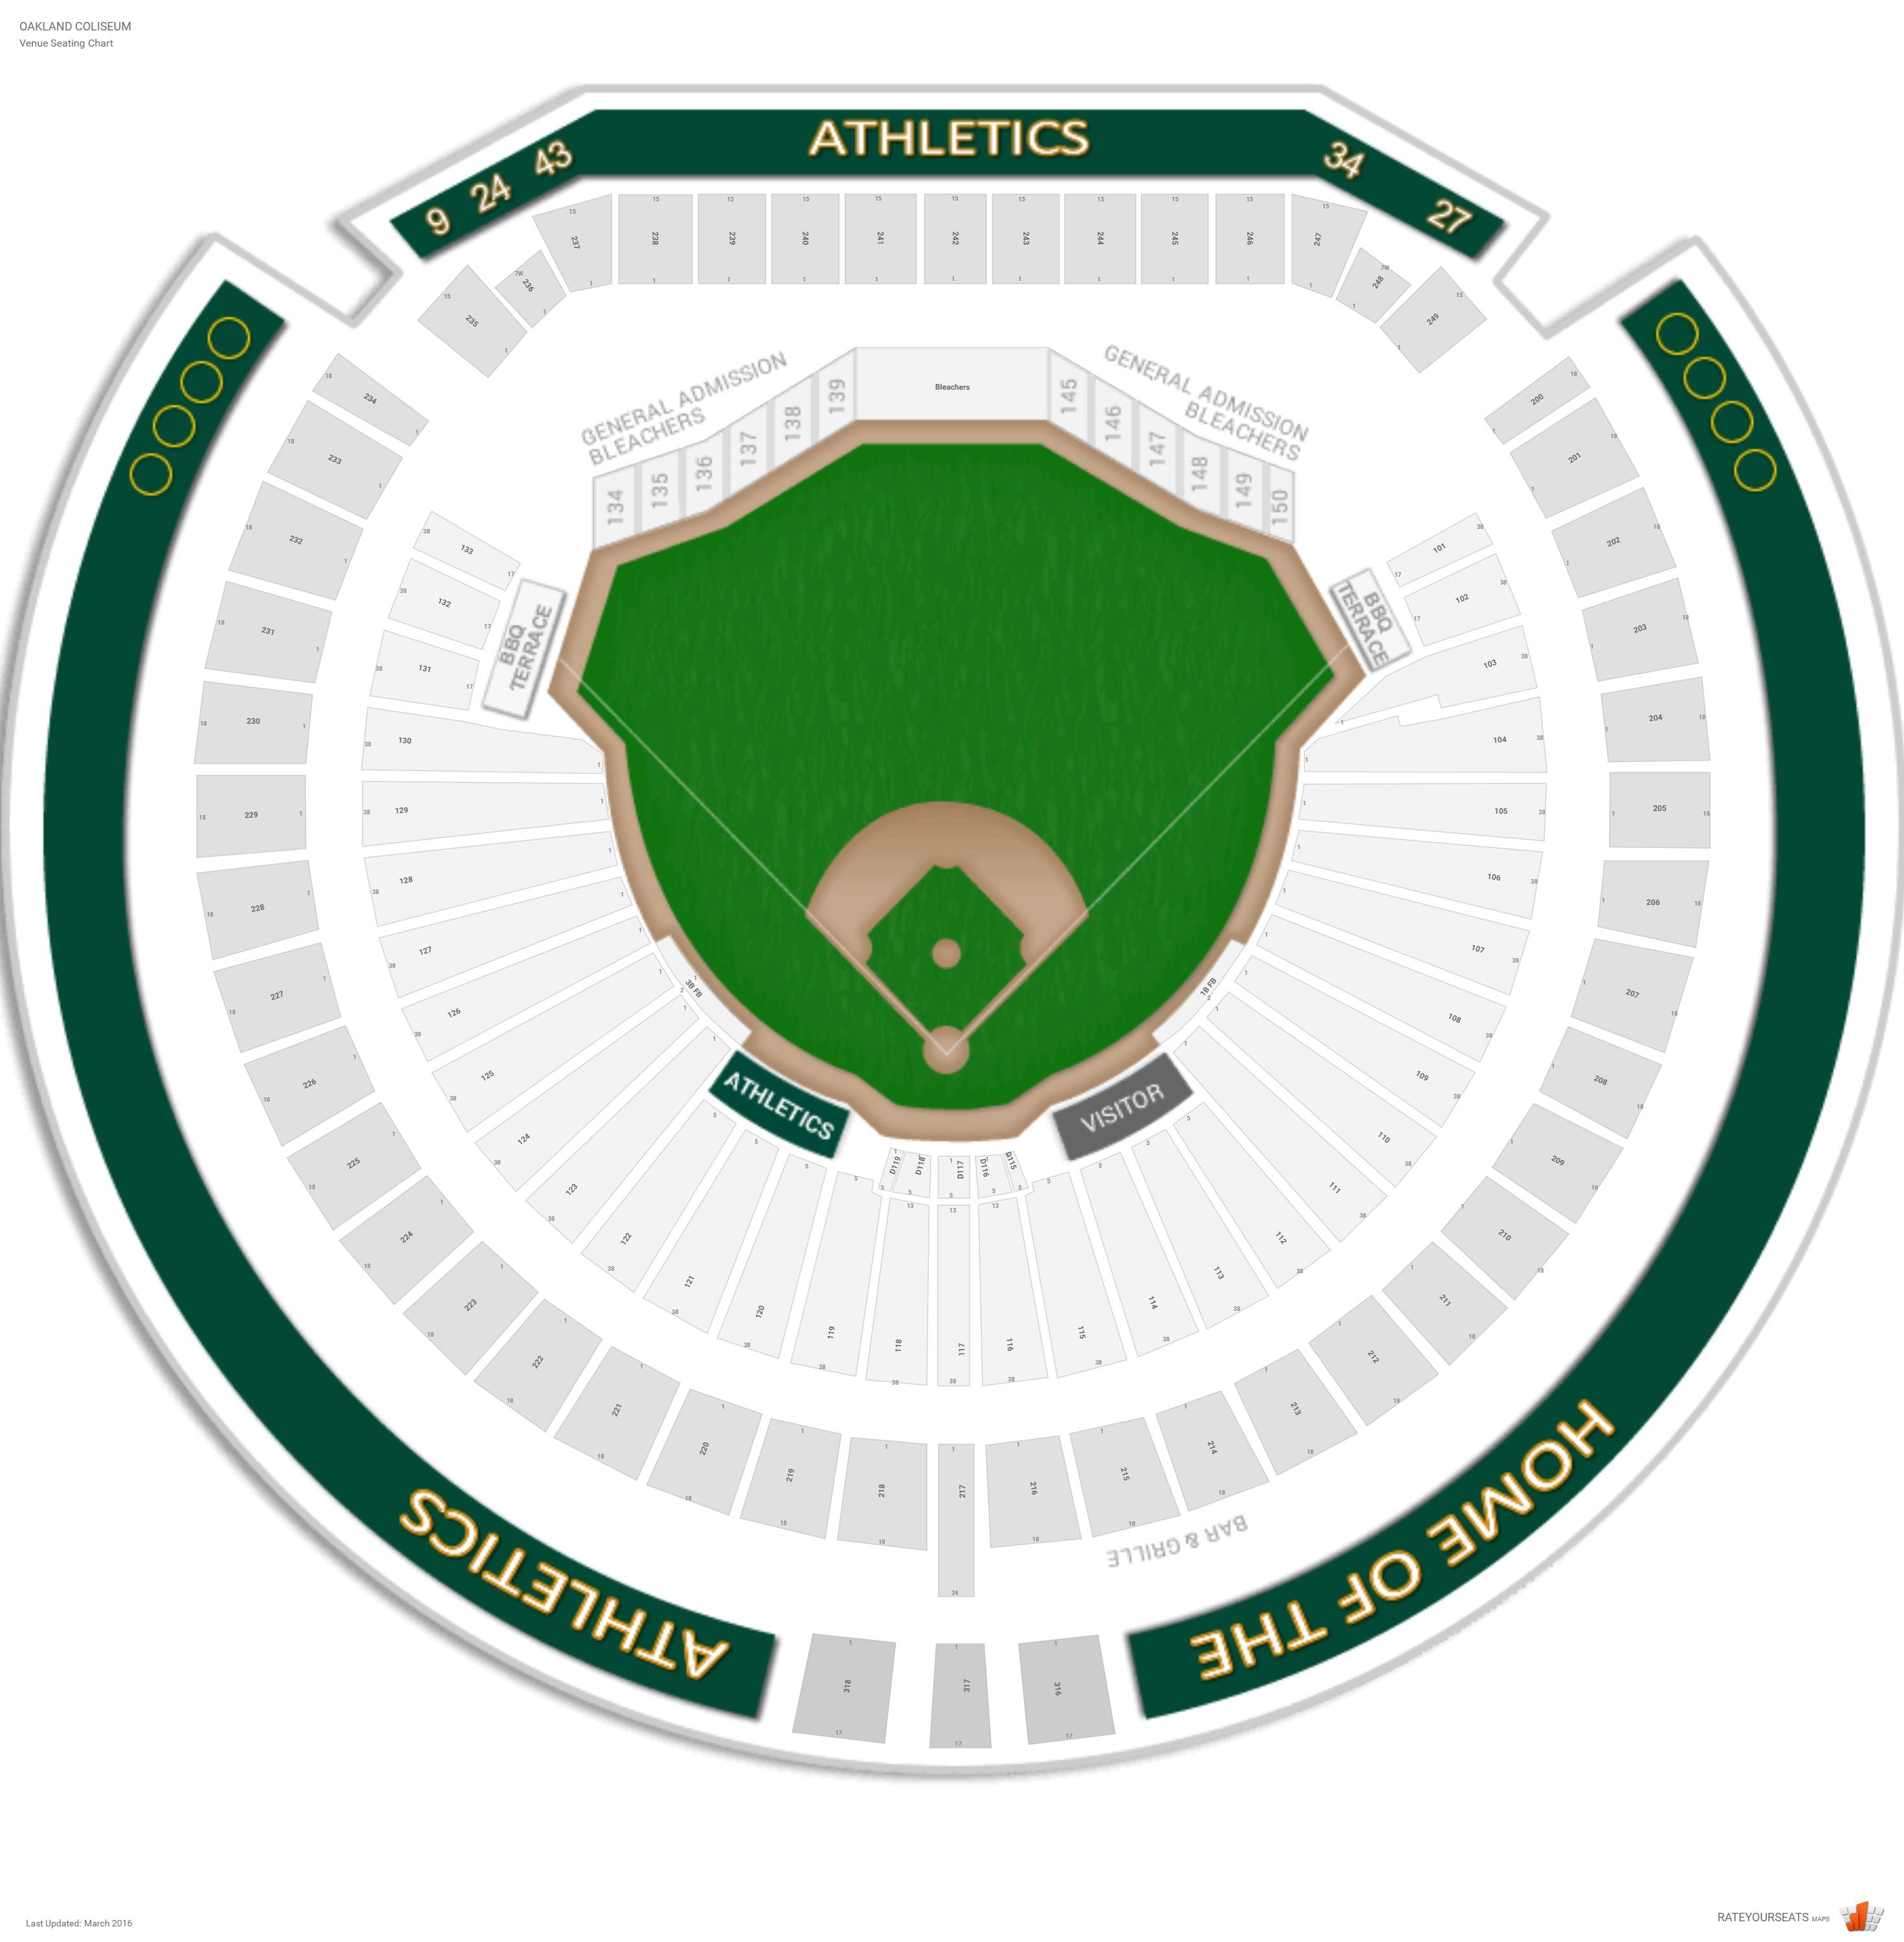 Ringcentral Coliseum Seating Chart